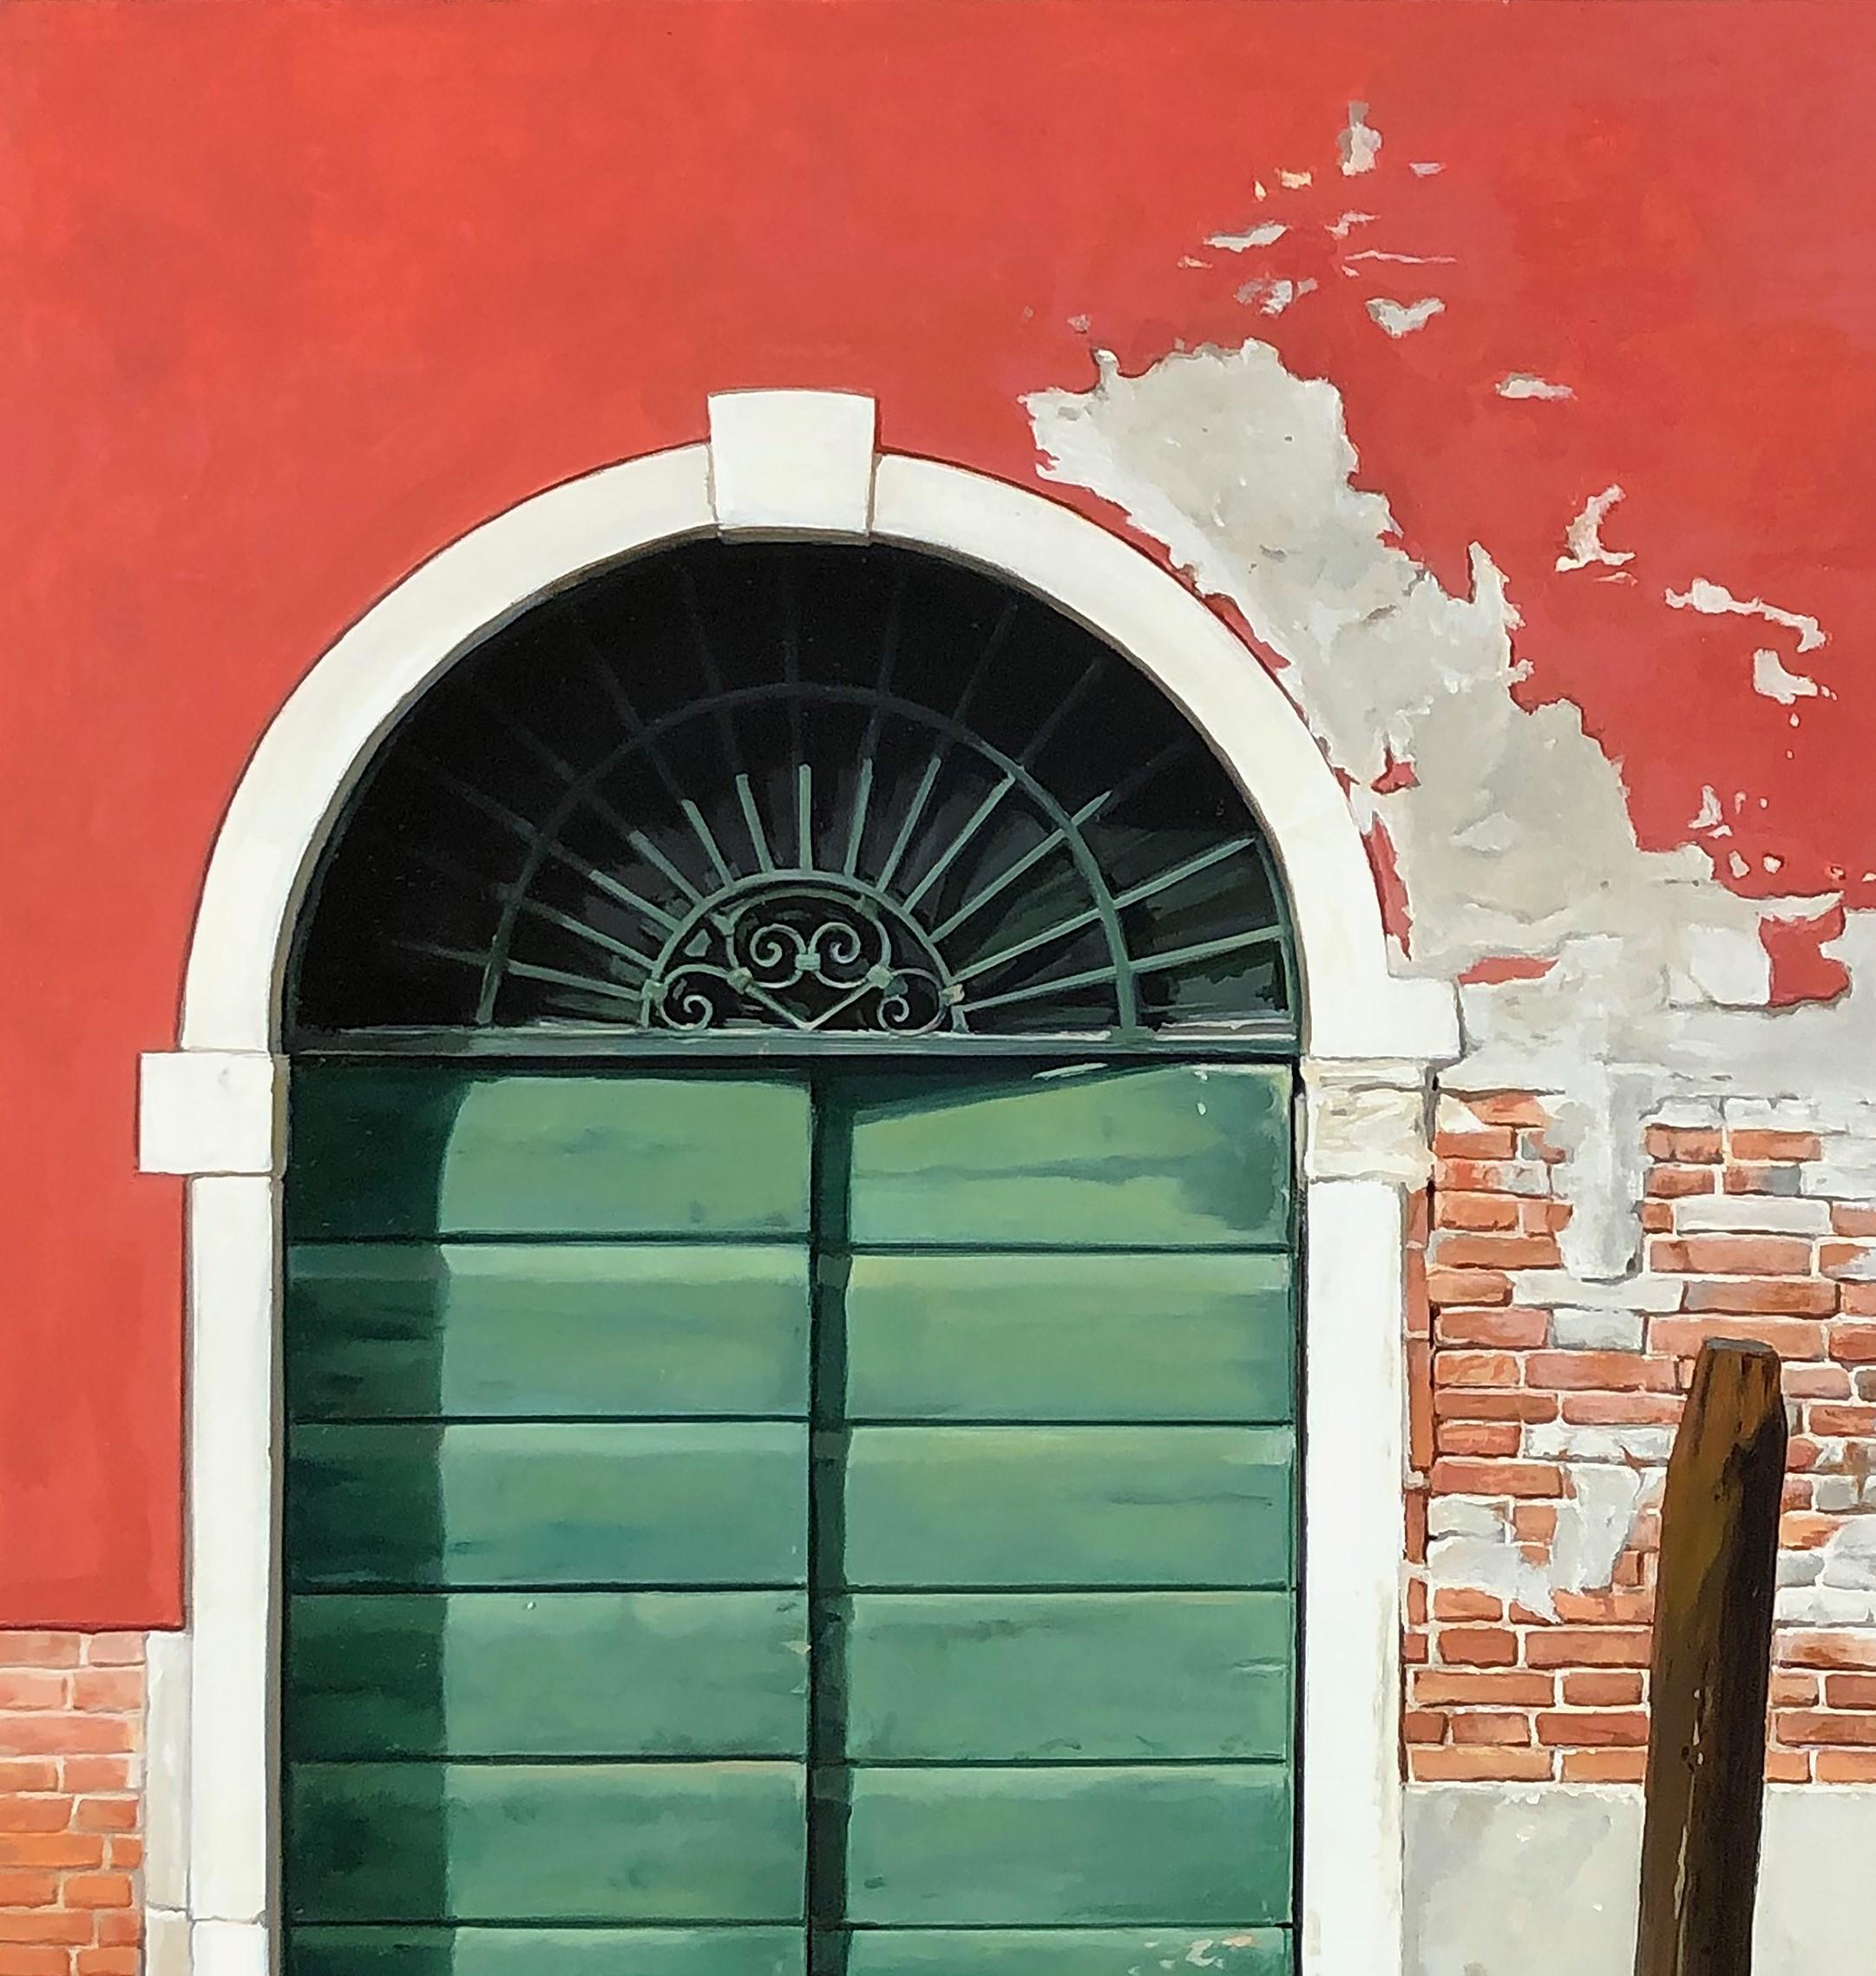  Acqua in Aumento (Rising Water) - Architectural Venetian Water Scene, Original - Contemporary Painting by Carol Pylant